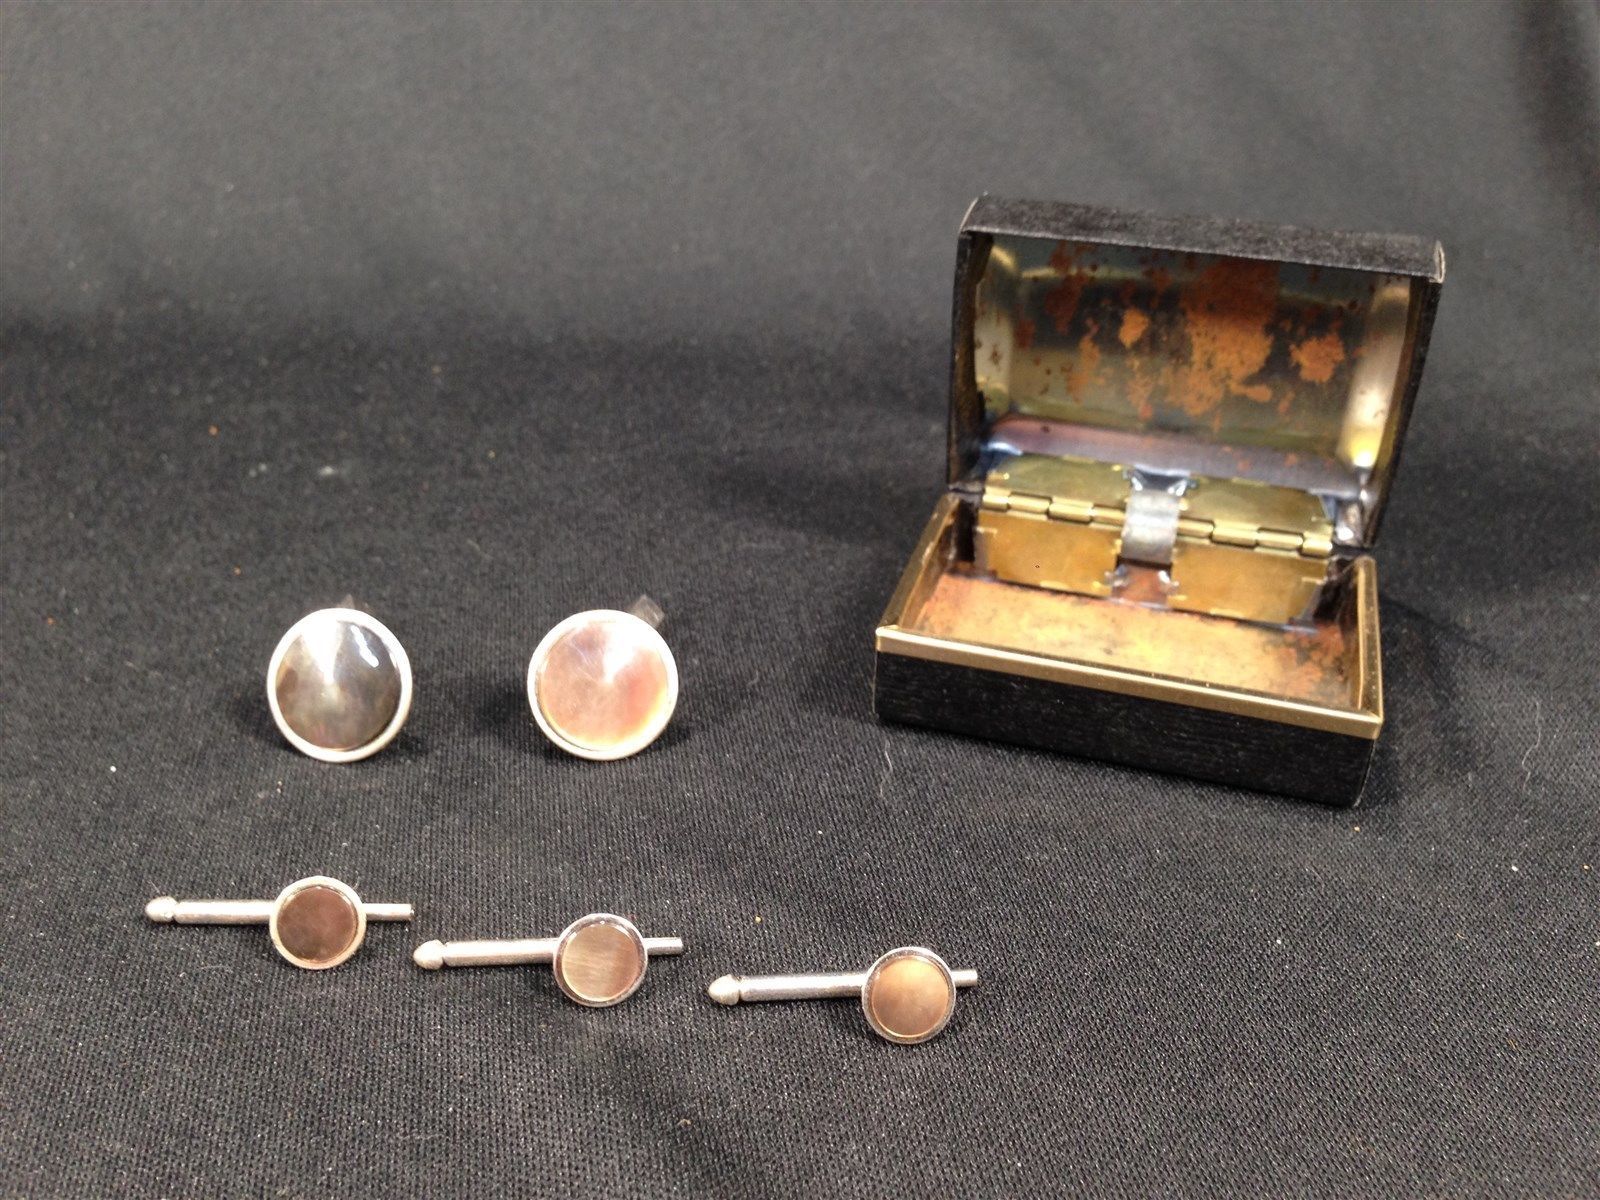 Primary image for Vintage Swank Cufflinks & Button Studs Set in Metal Box Cuff Links